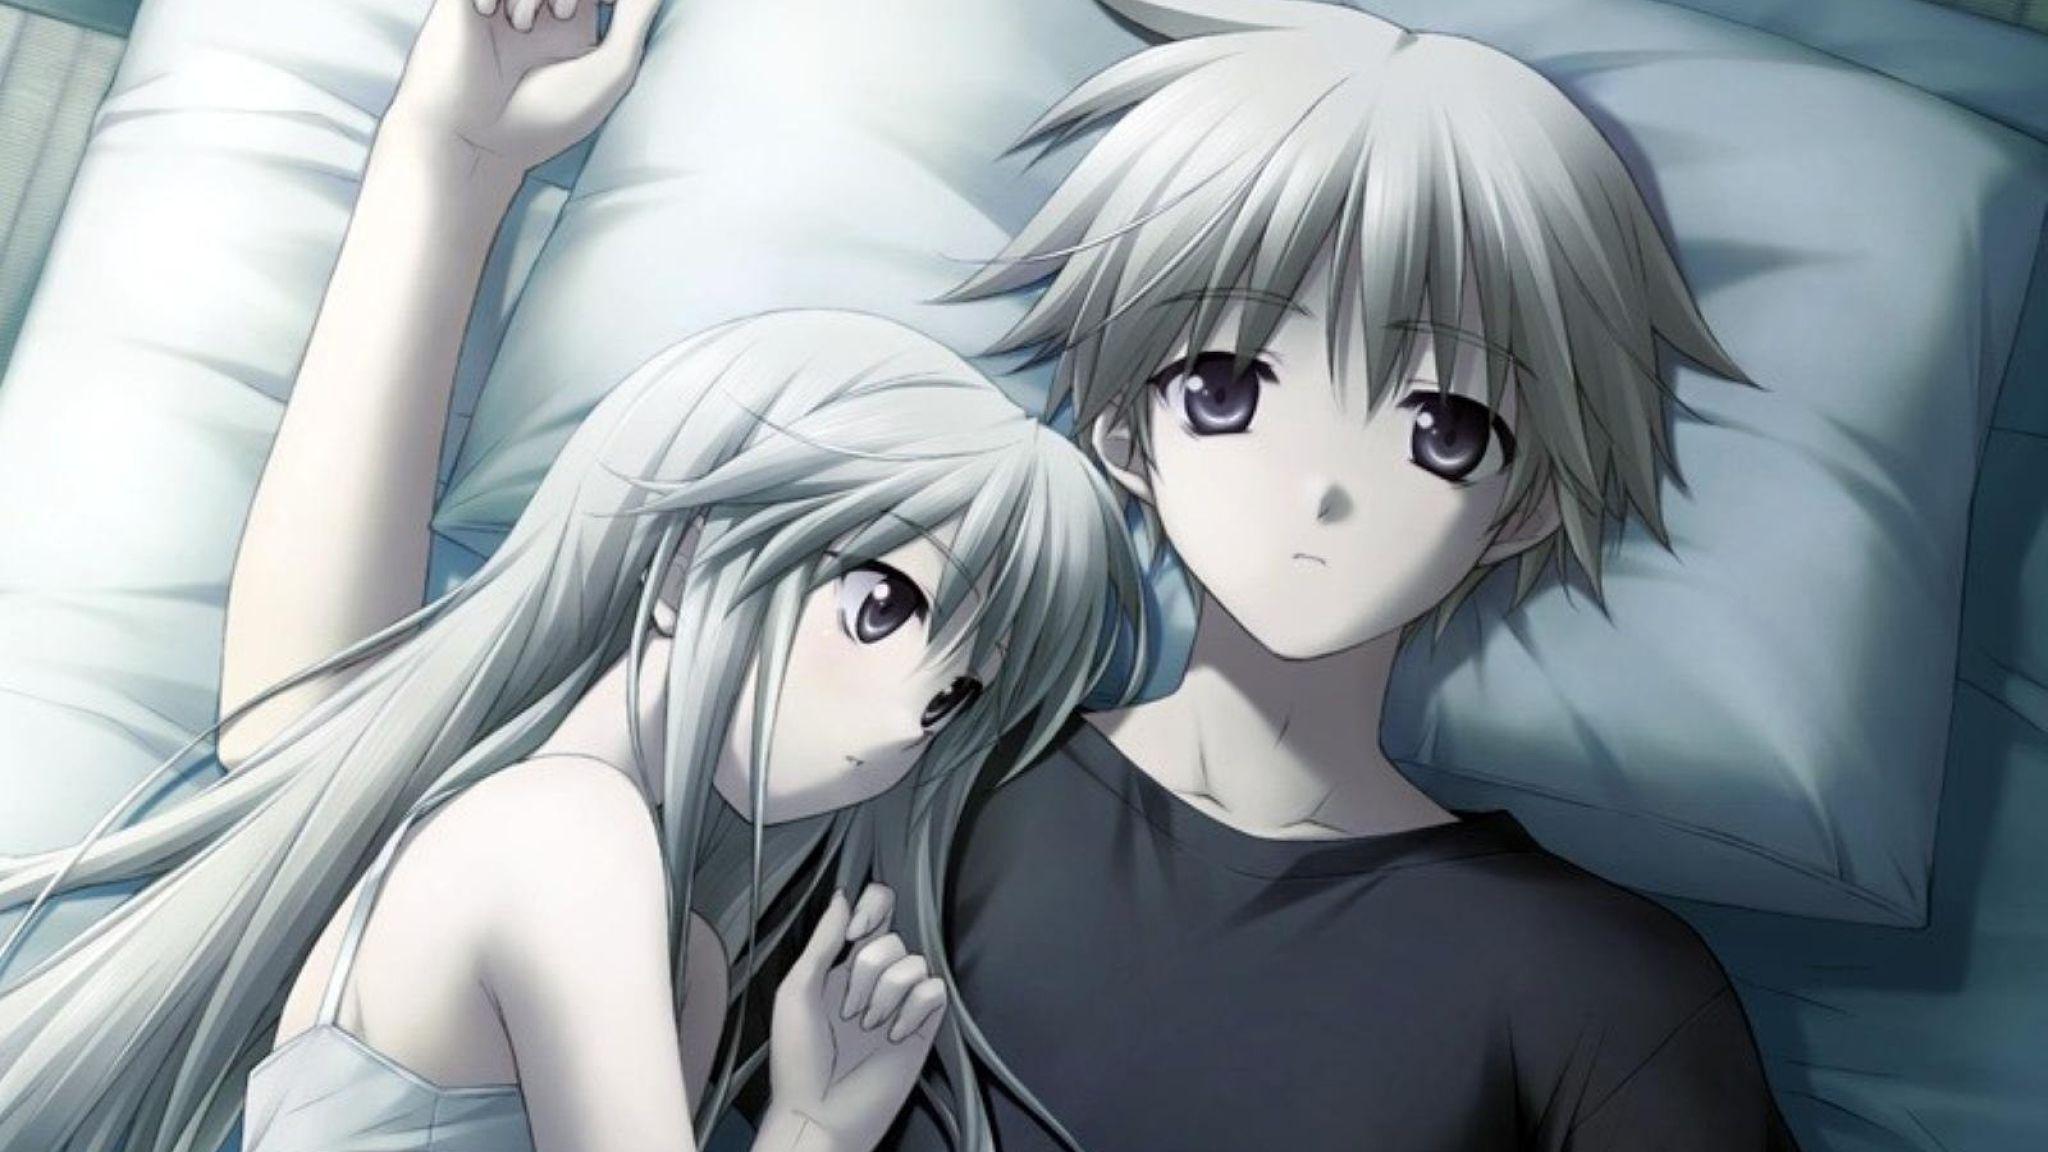 Anime Sad Love Relationship Wallpapers  Wallpaper Cave